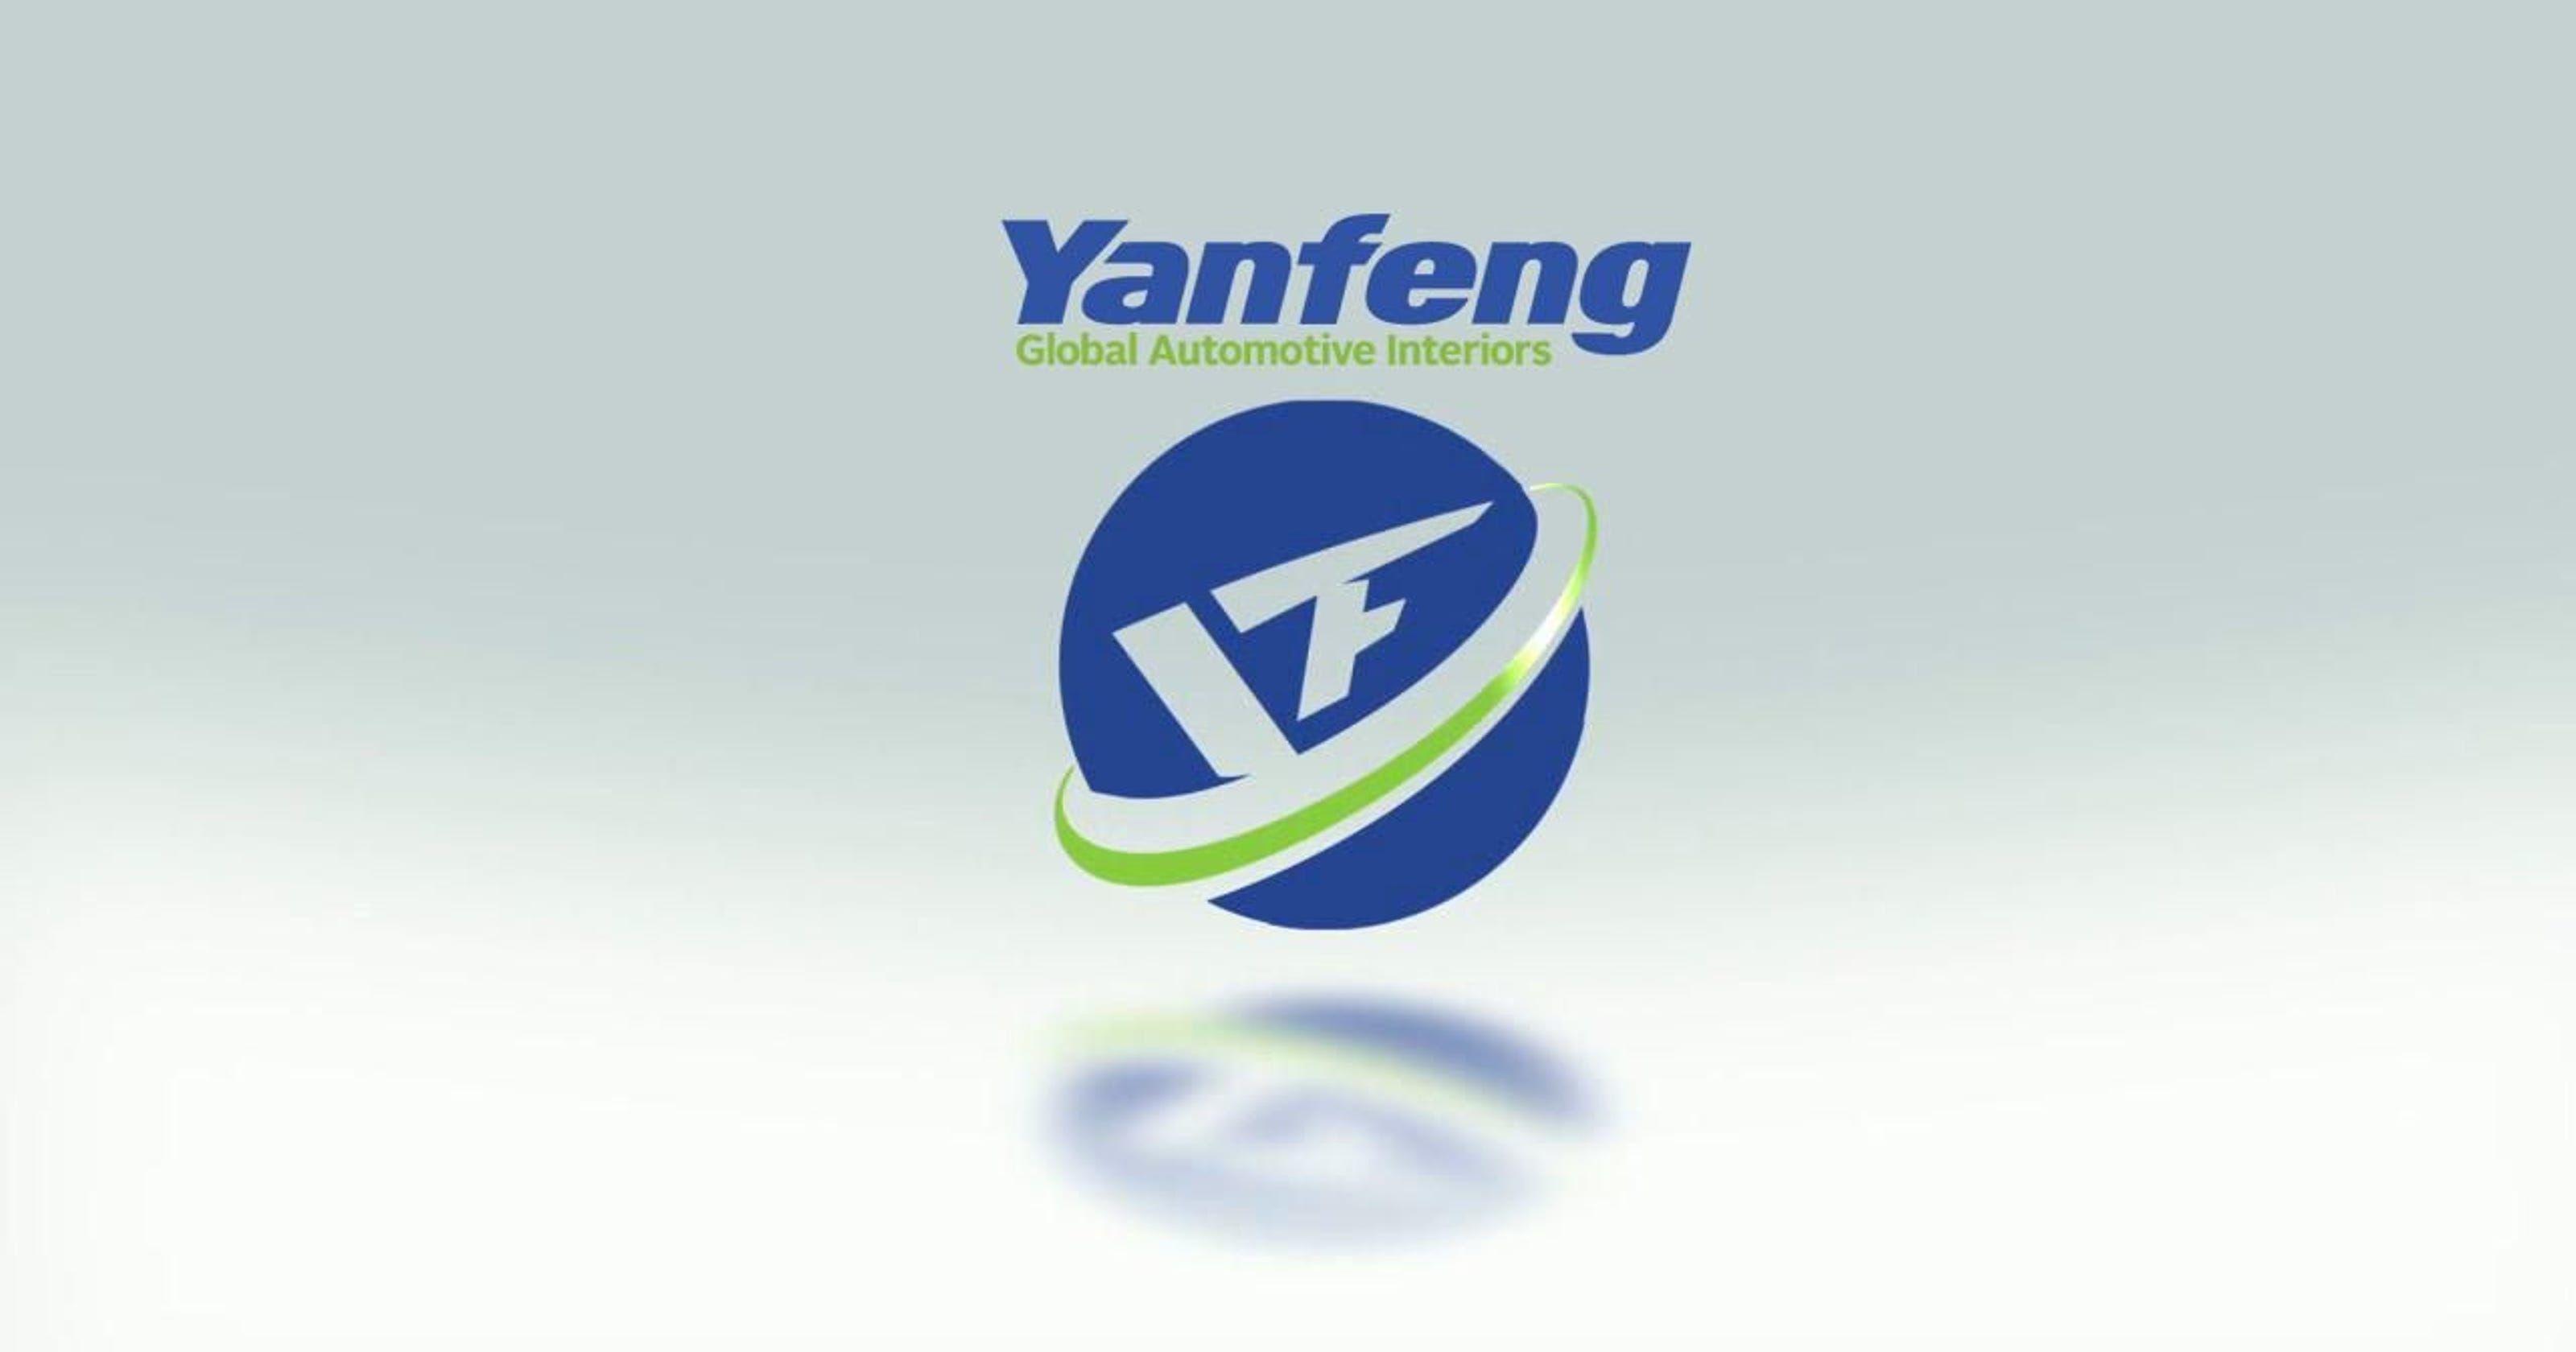 Yanfeng Logo - Auto supplier investing $8.45M for HQ, tech lab in Novi